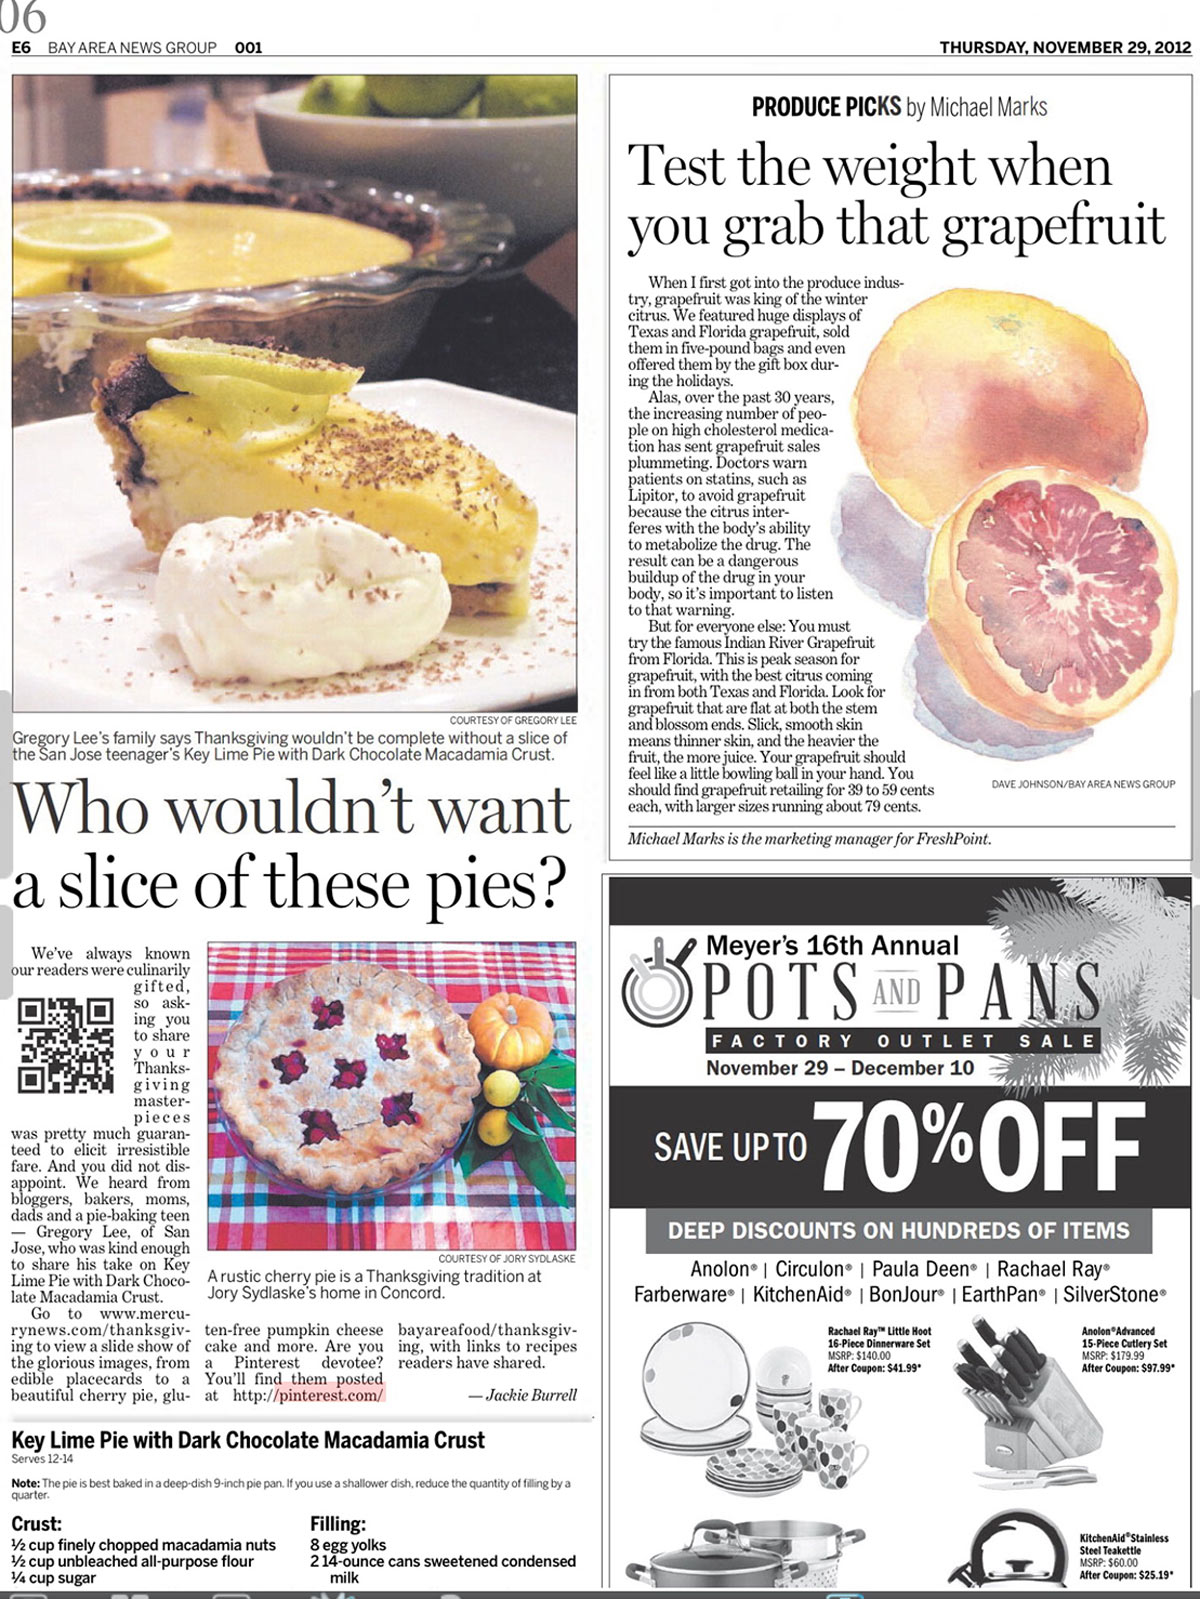 Key lime pie in the San Jose Mercury News food section.